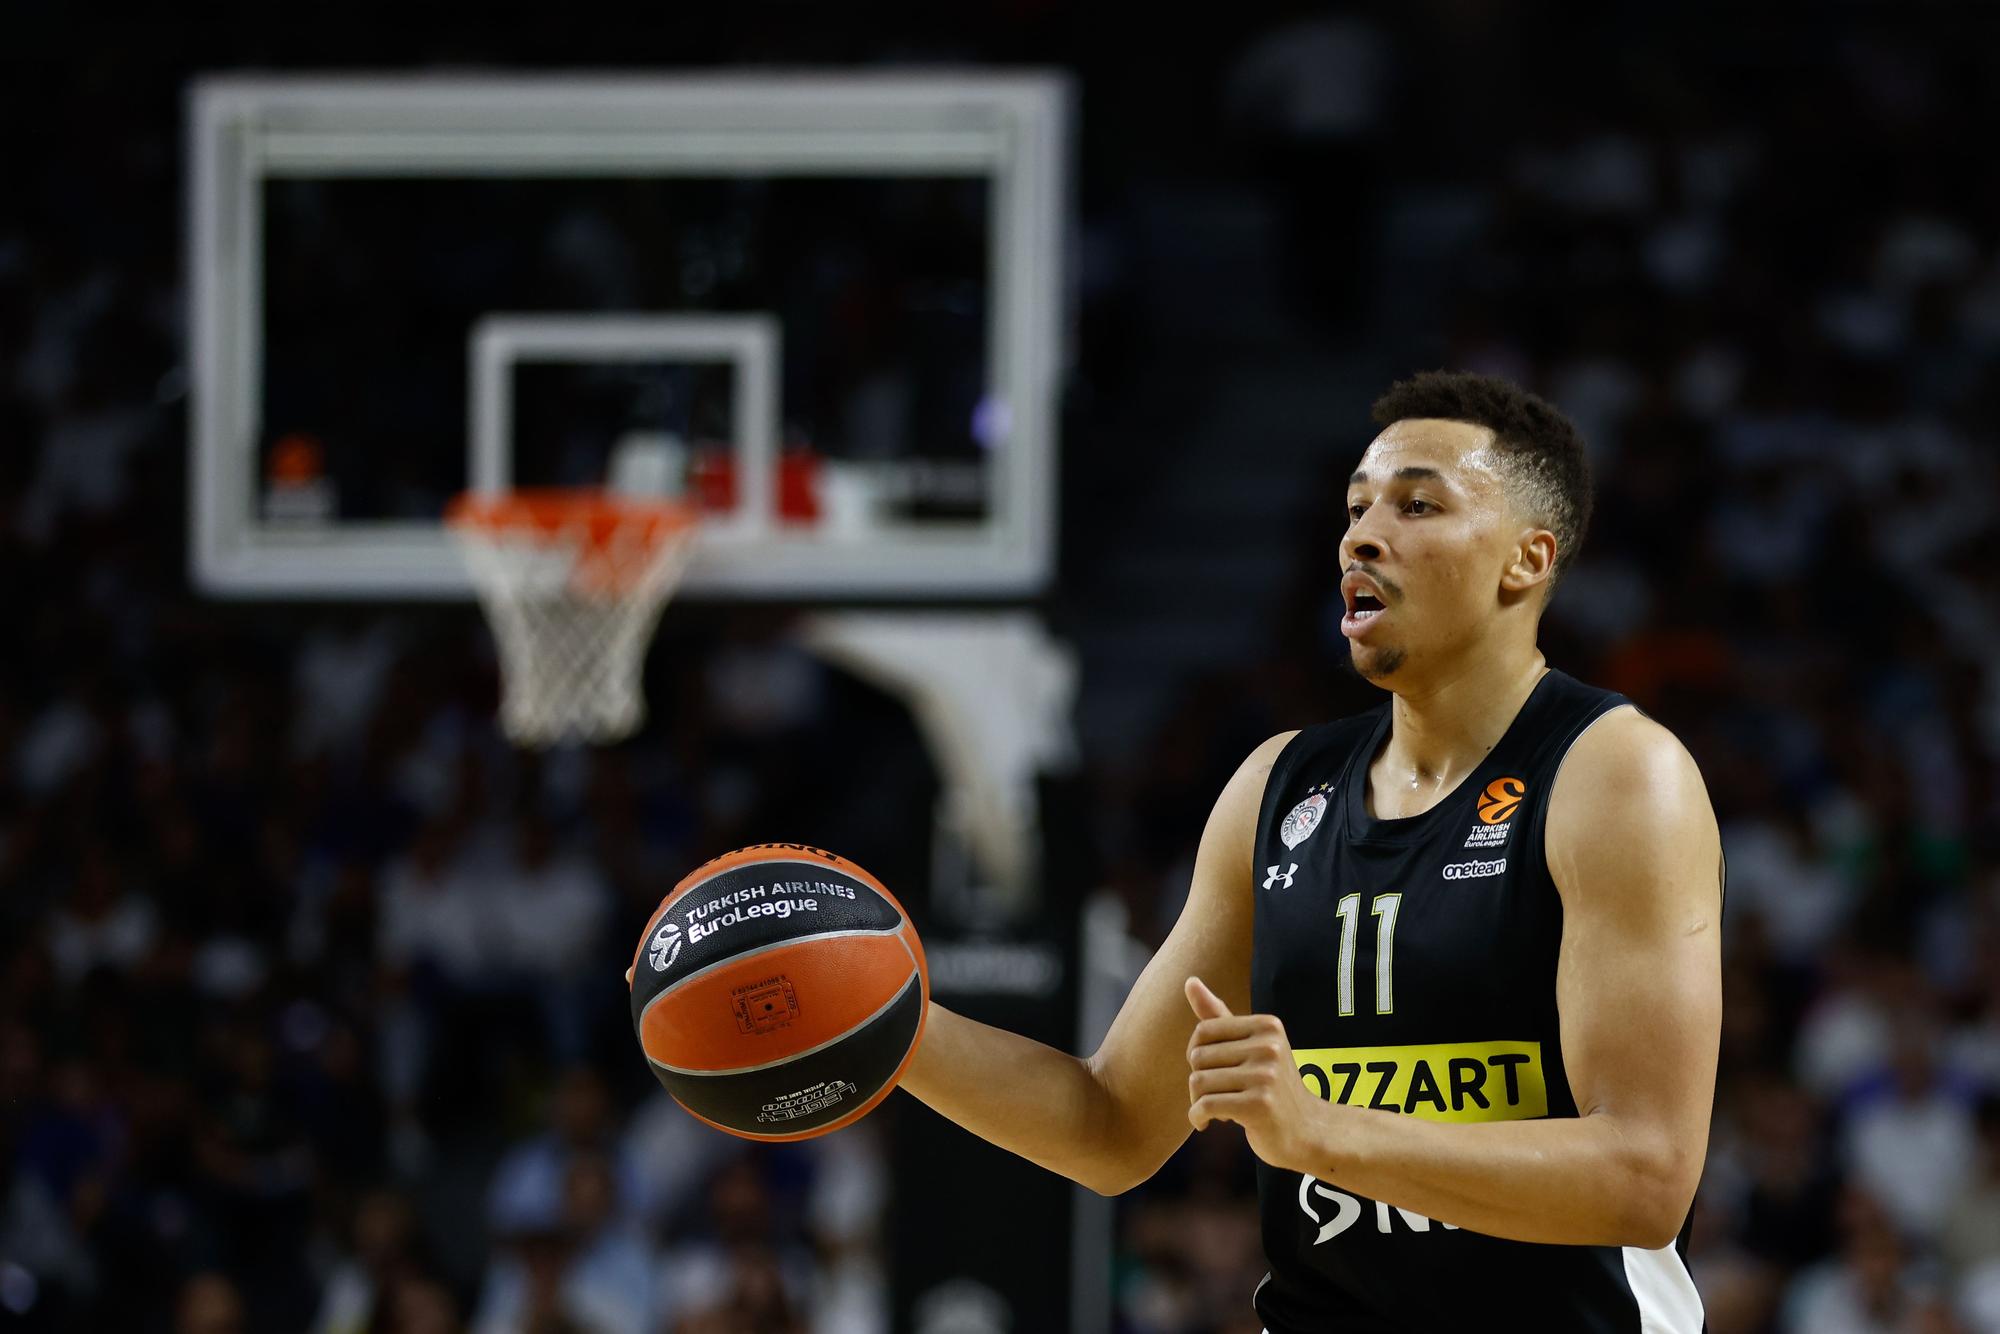 Dante Exum of Partizan in action during the Turkish Airlines Euroleague, Playoff C, basketball match played between Real Madrid and Partizan Mozzart Bet Belgrade Roster at Wizink Center pavilion on May 10, 2023 in Madrid, Spain.